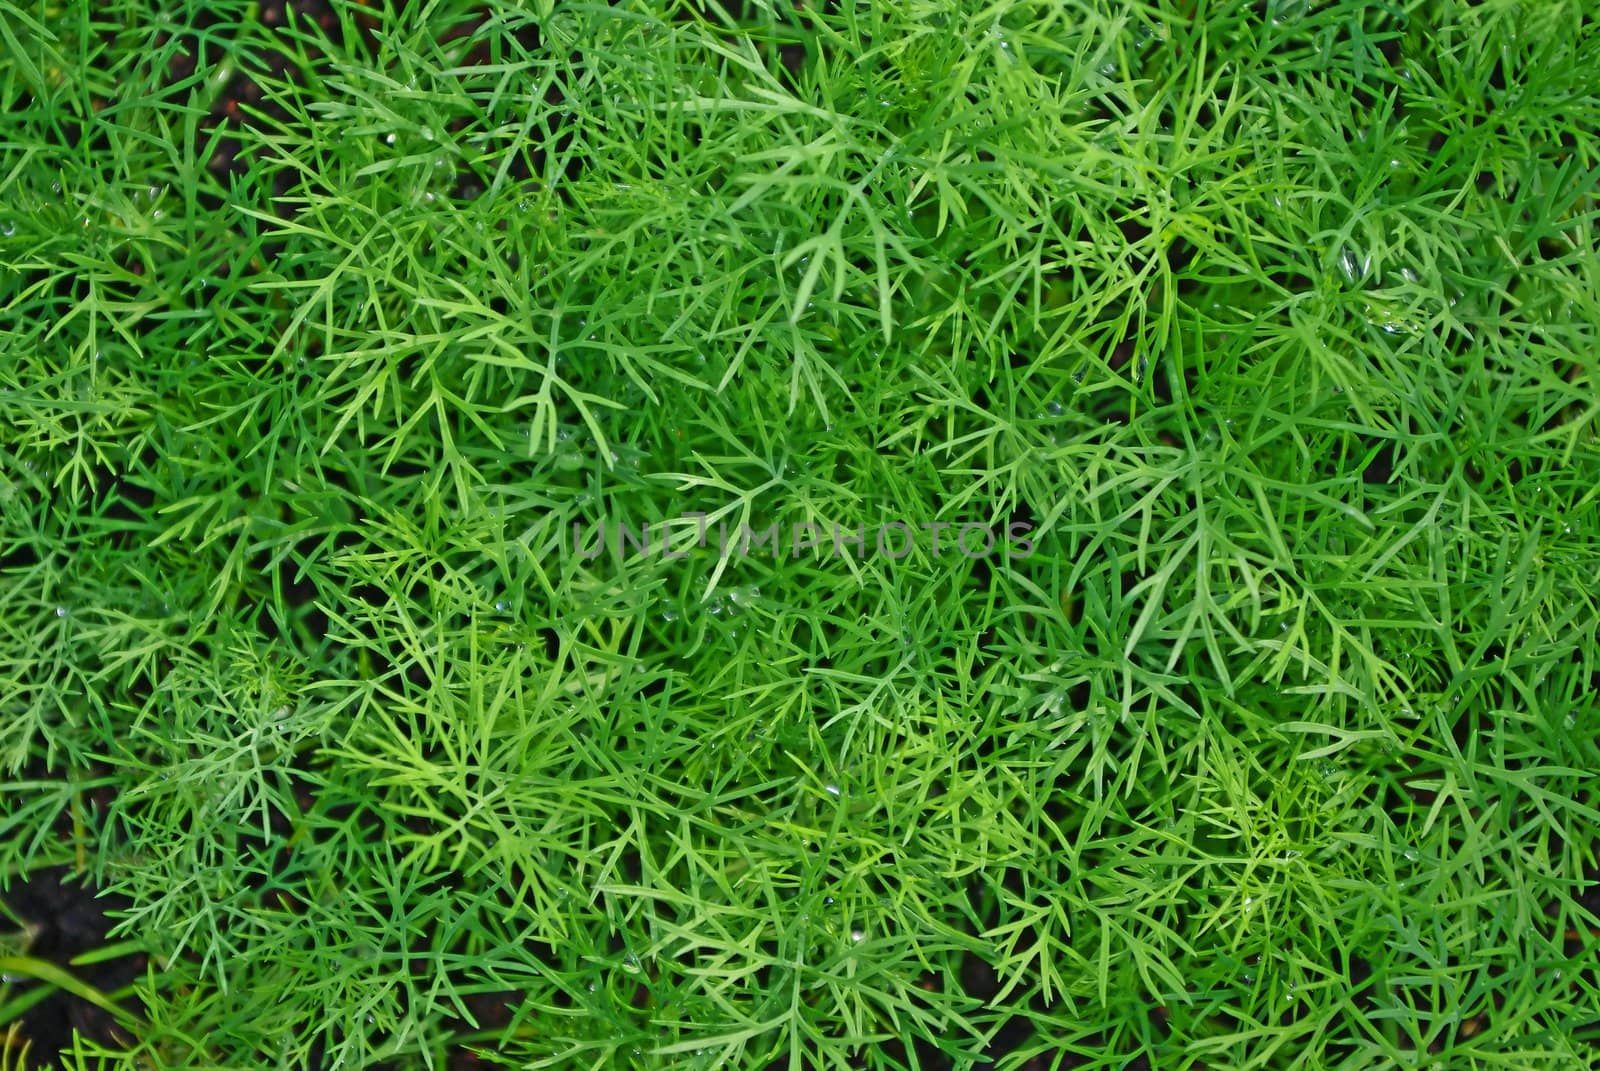 Fresh green sprouts of dill in summer close-up